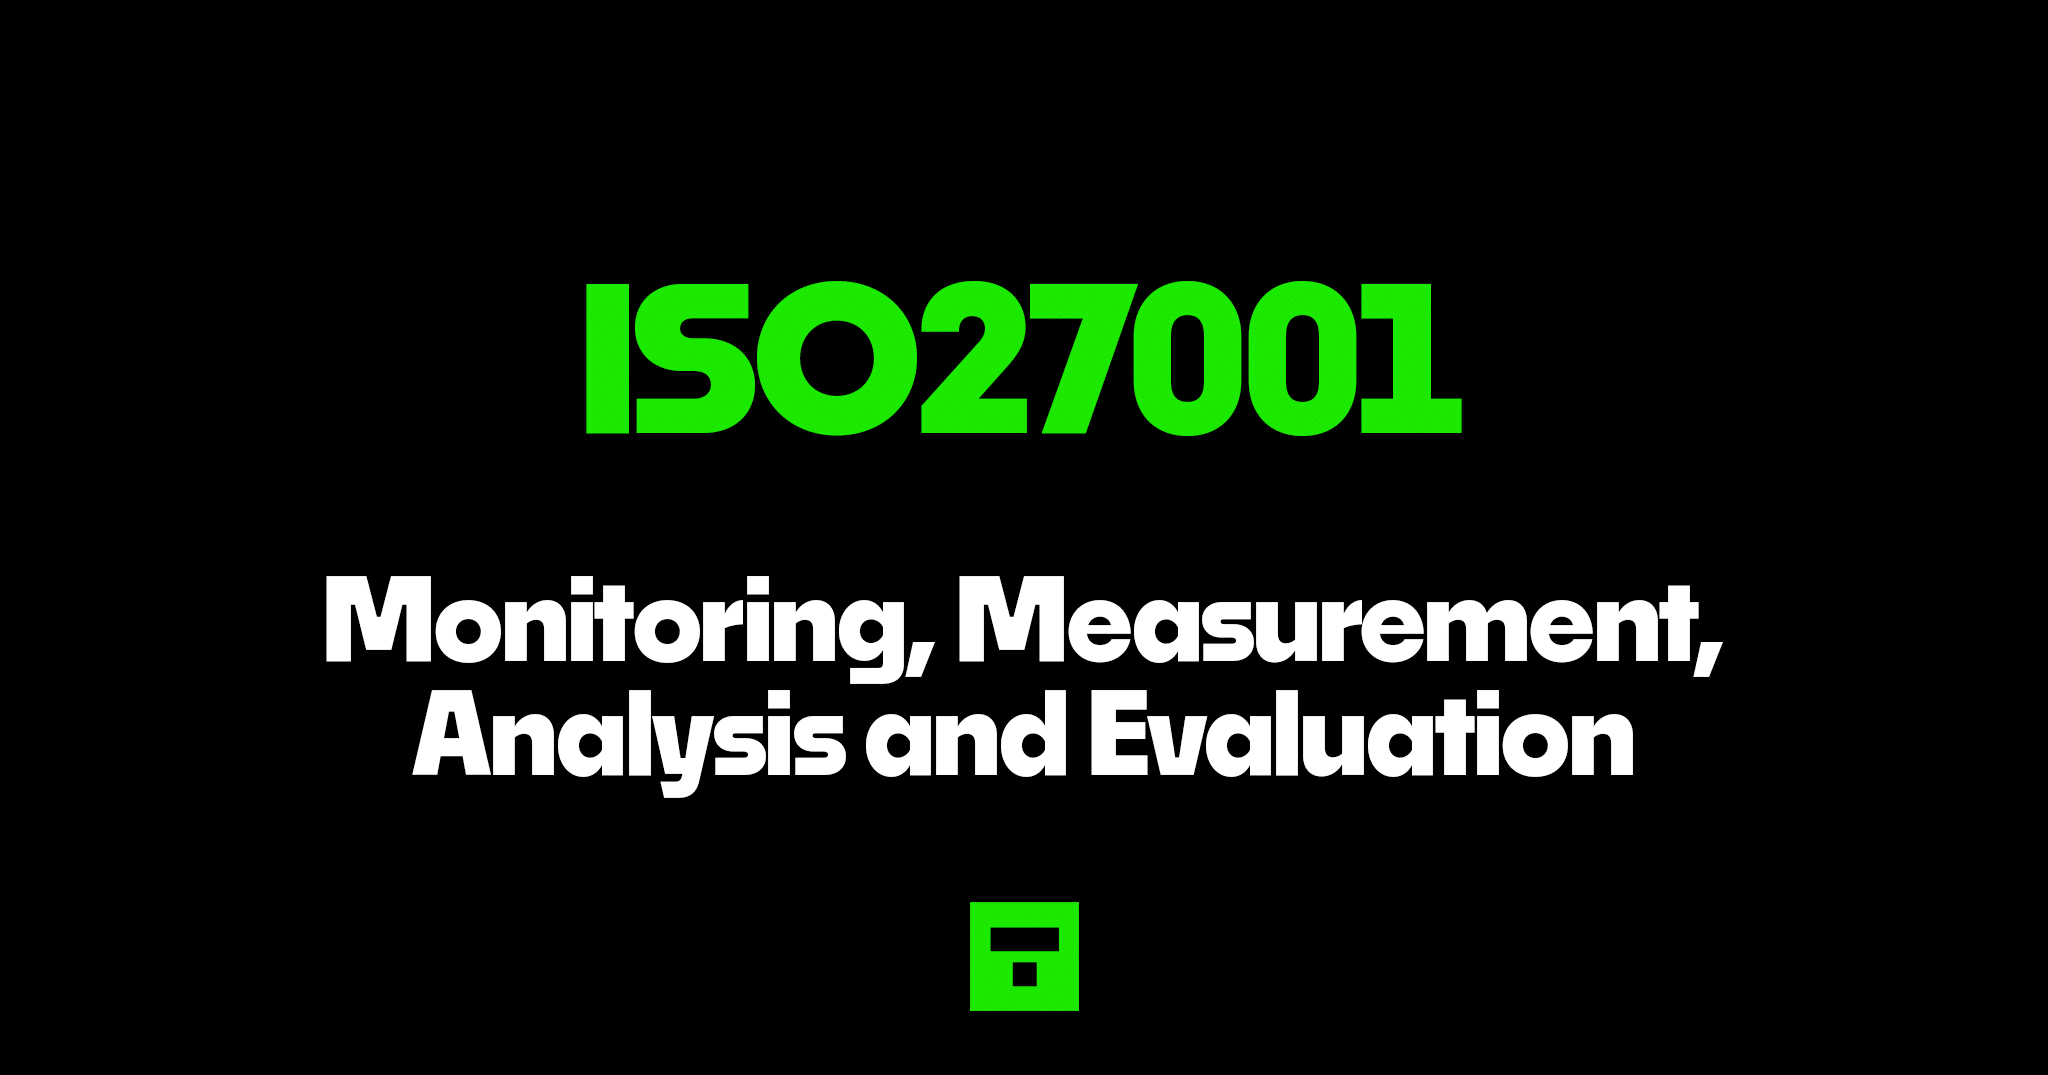 ISO27001 Monitoring, Measurement, Analysis and Evaluation